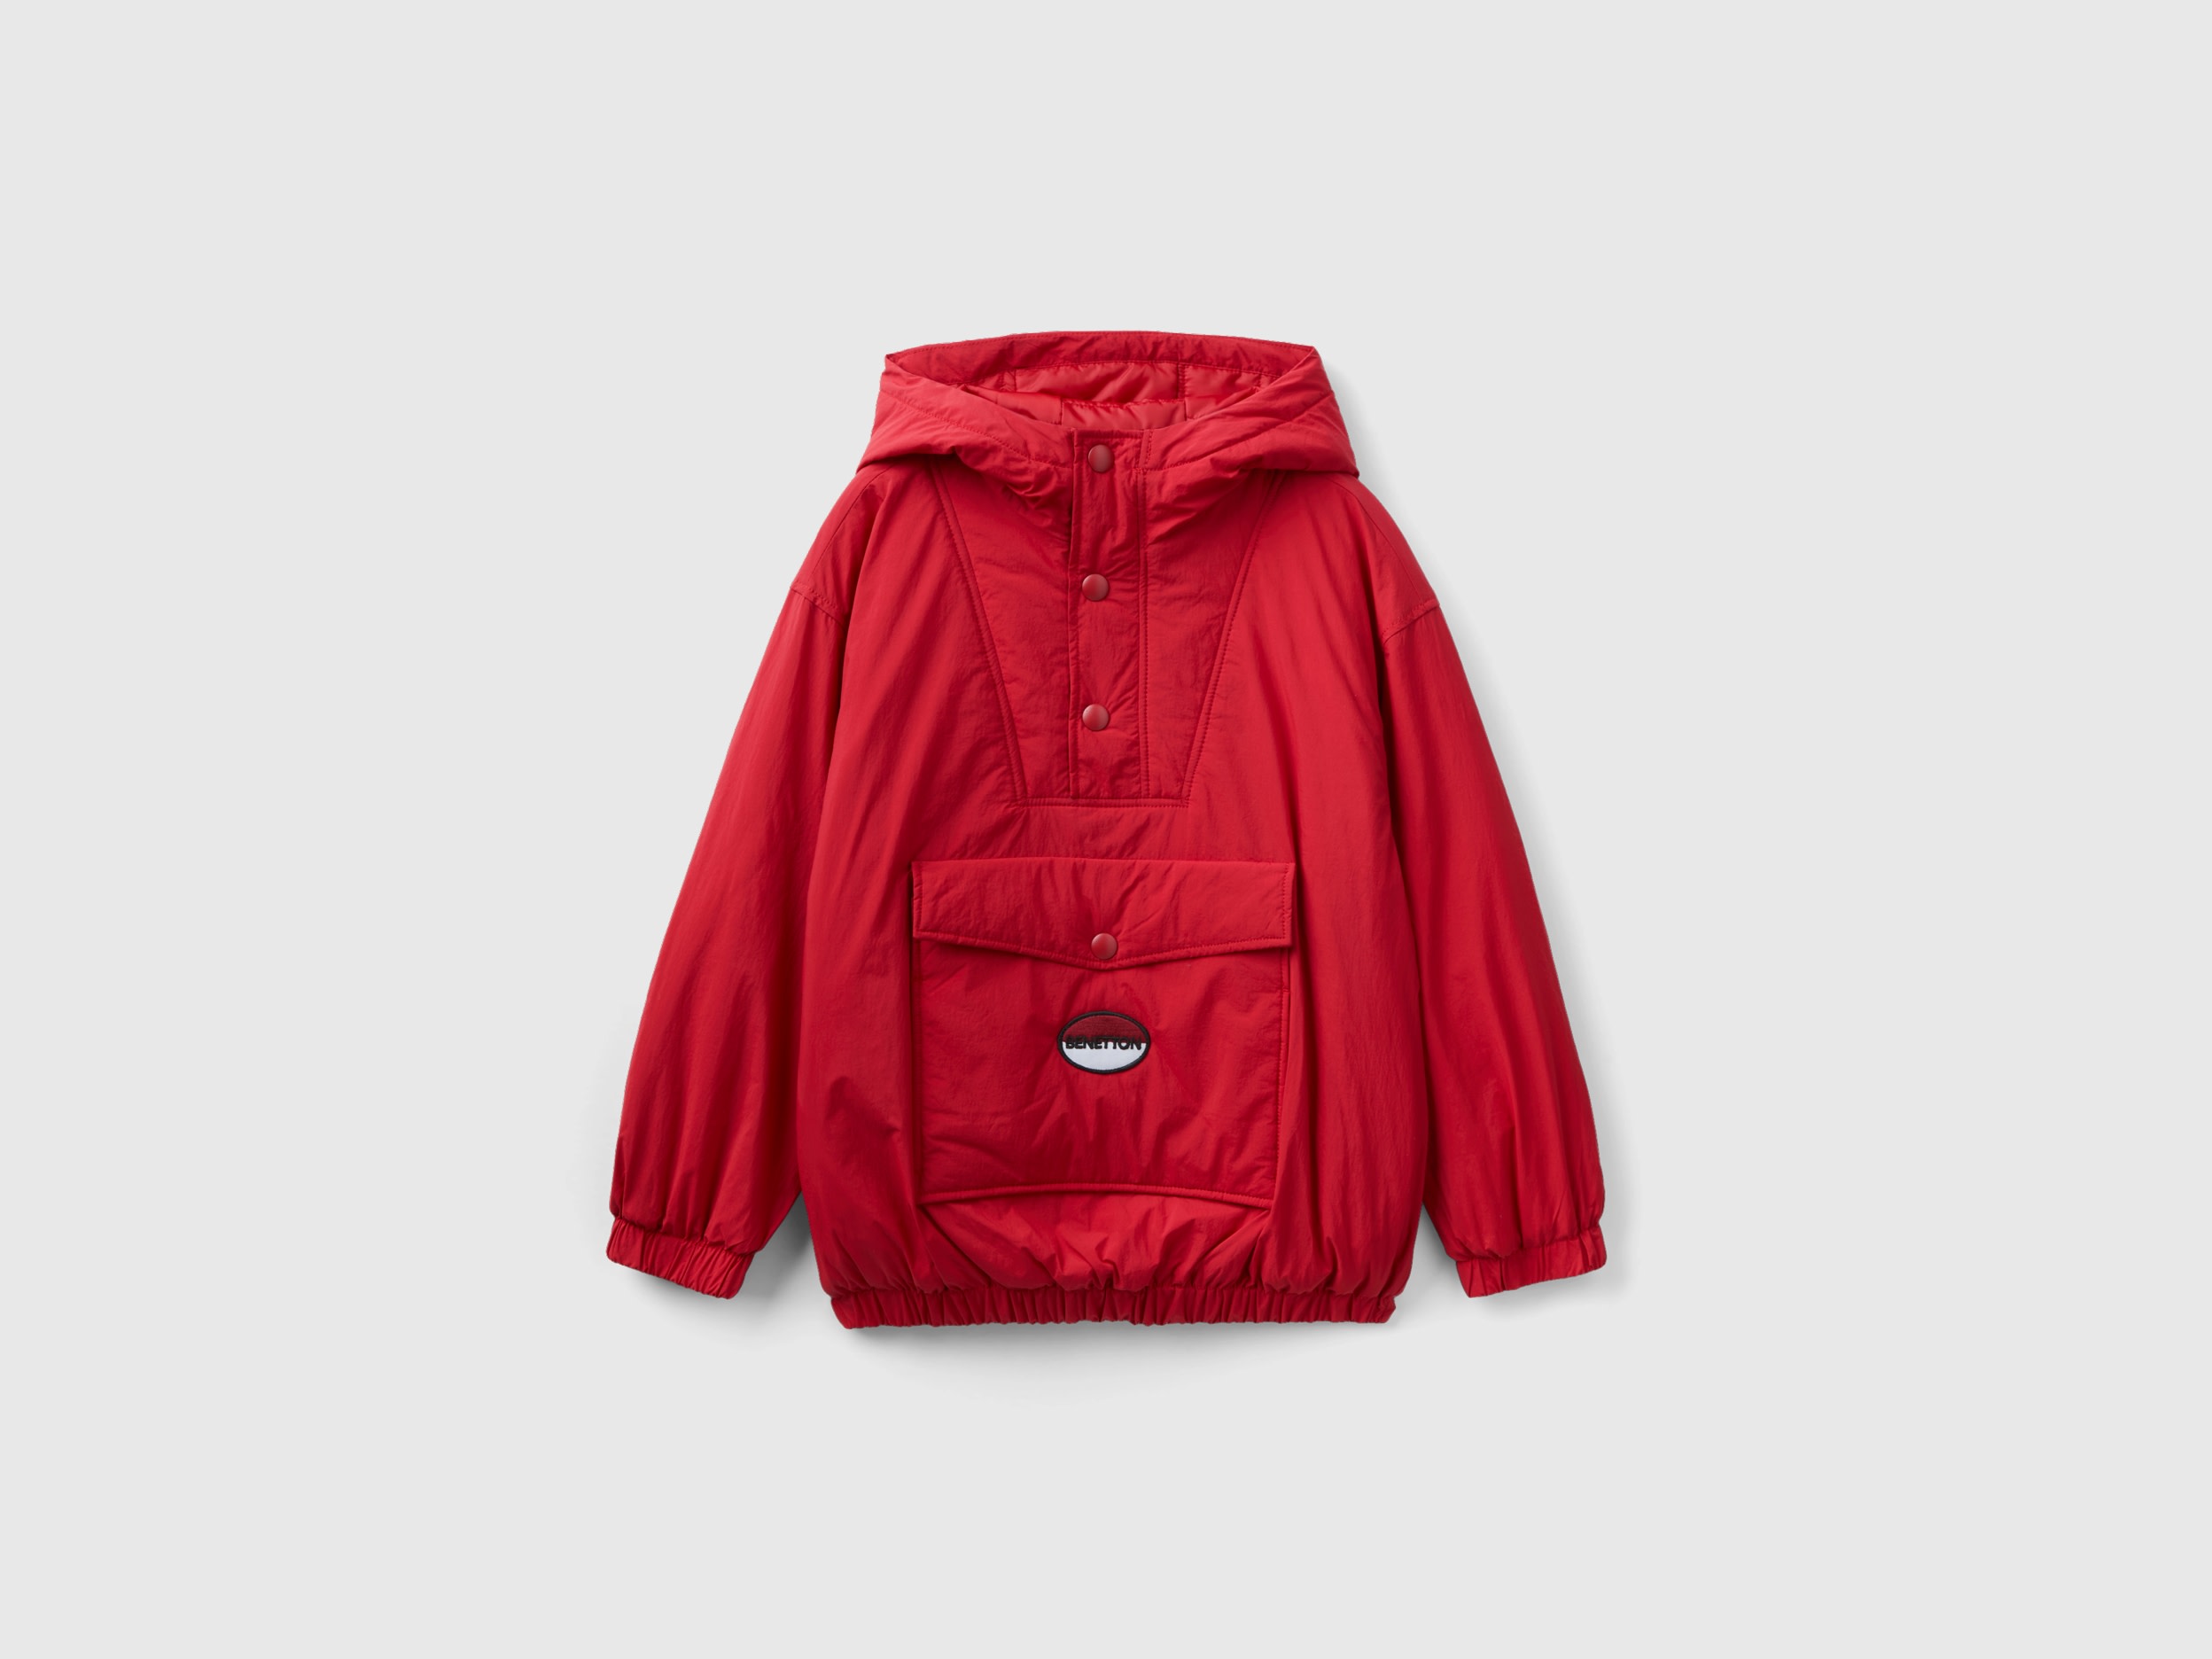 Benetton, Red Jacket With Pocket, size 2XL, Red, Kids